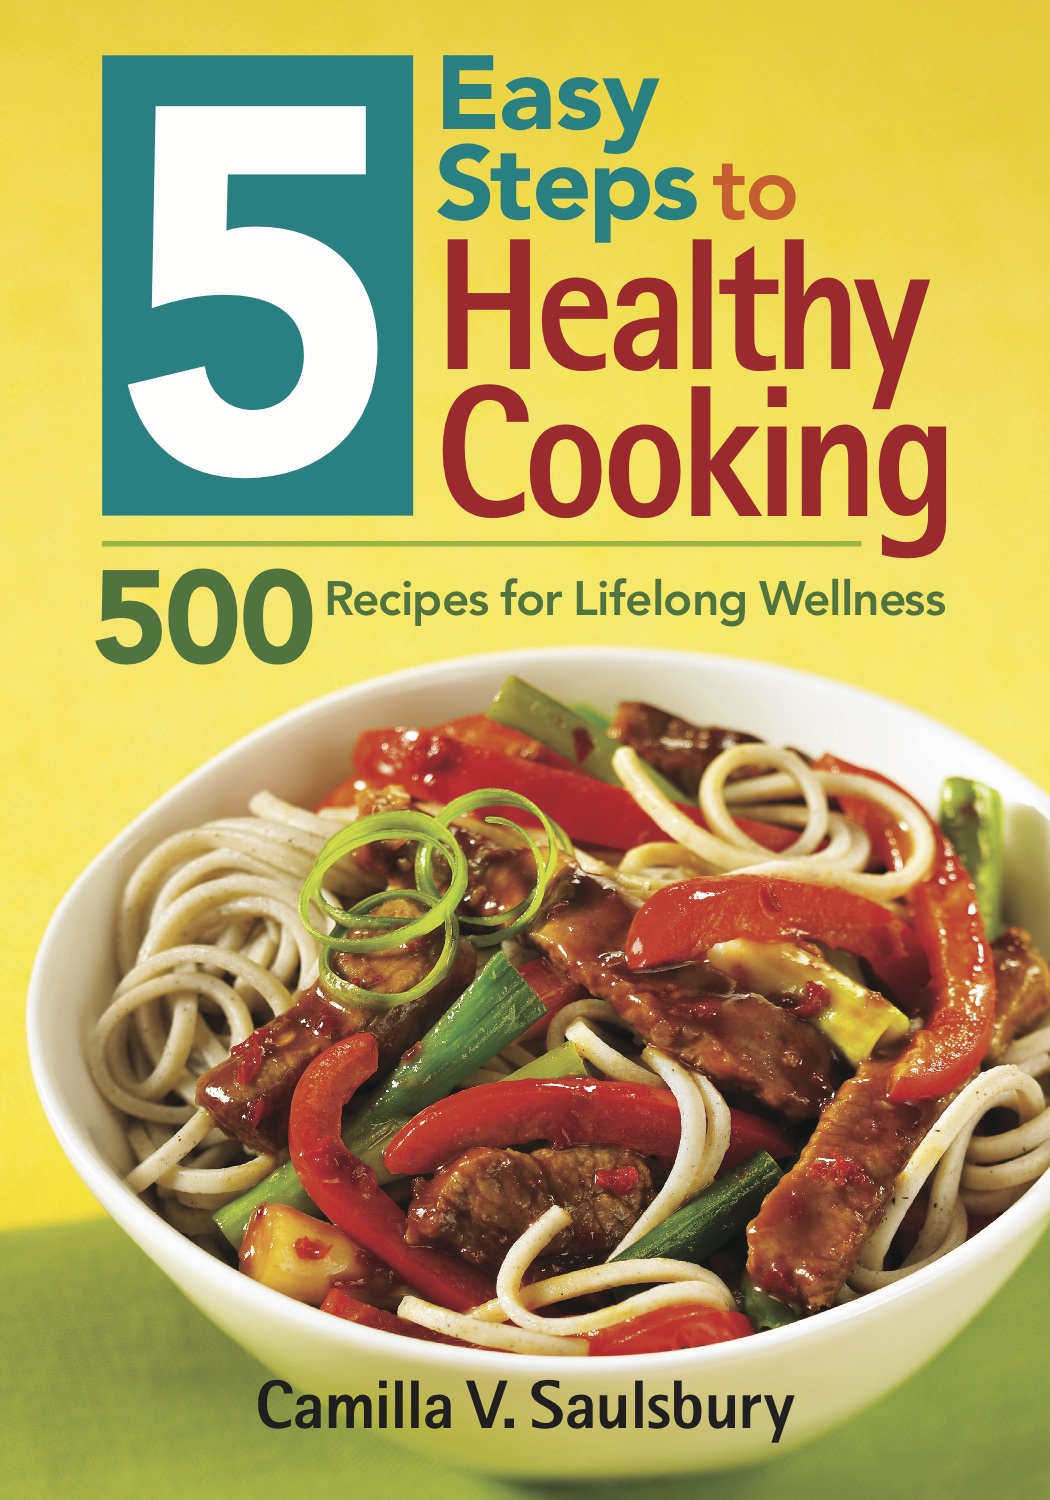 Twice the love...half the sleep!: Review: 5 Easy Steps to Healthy Cooking